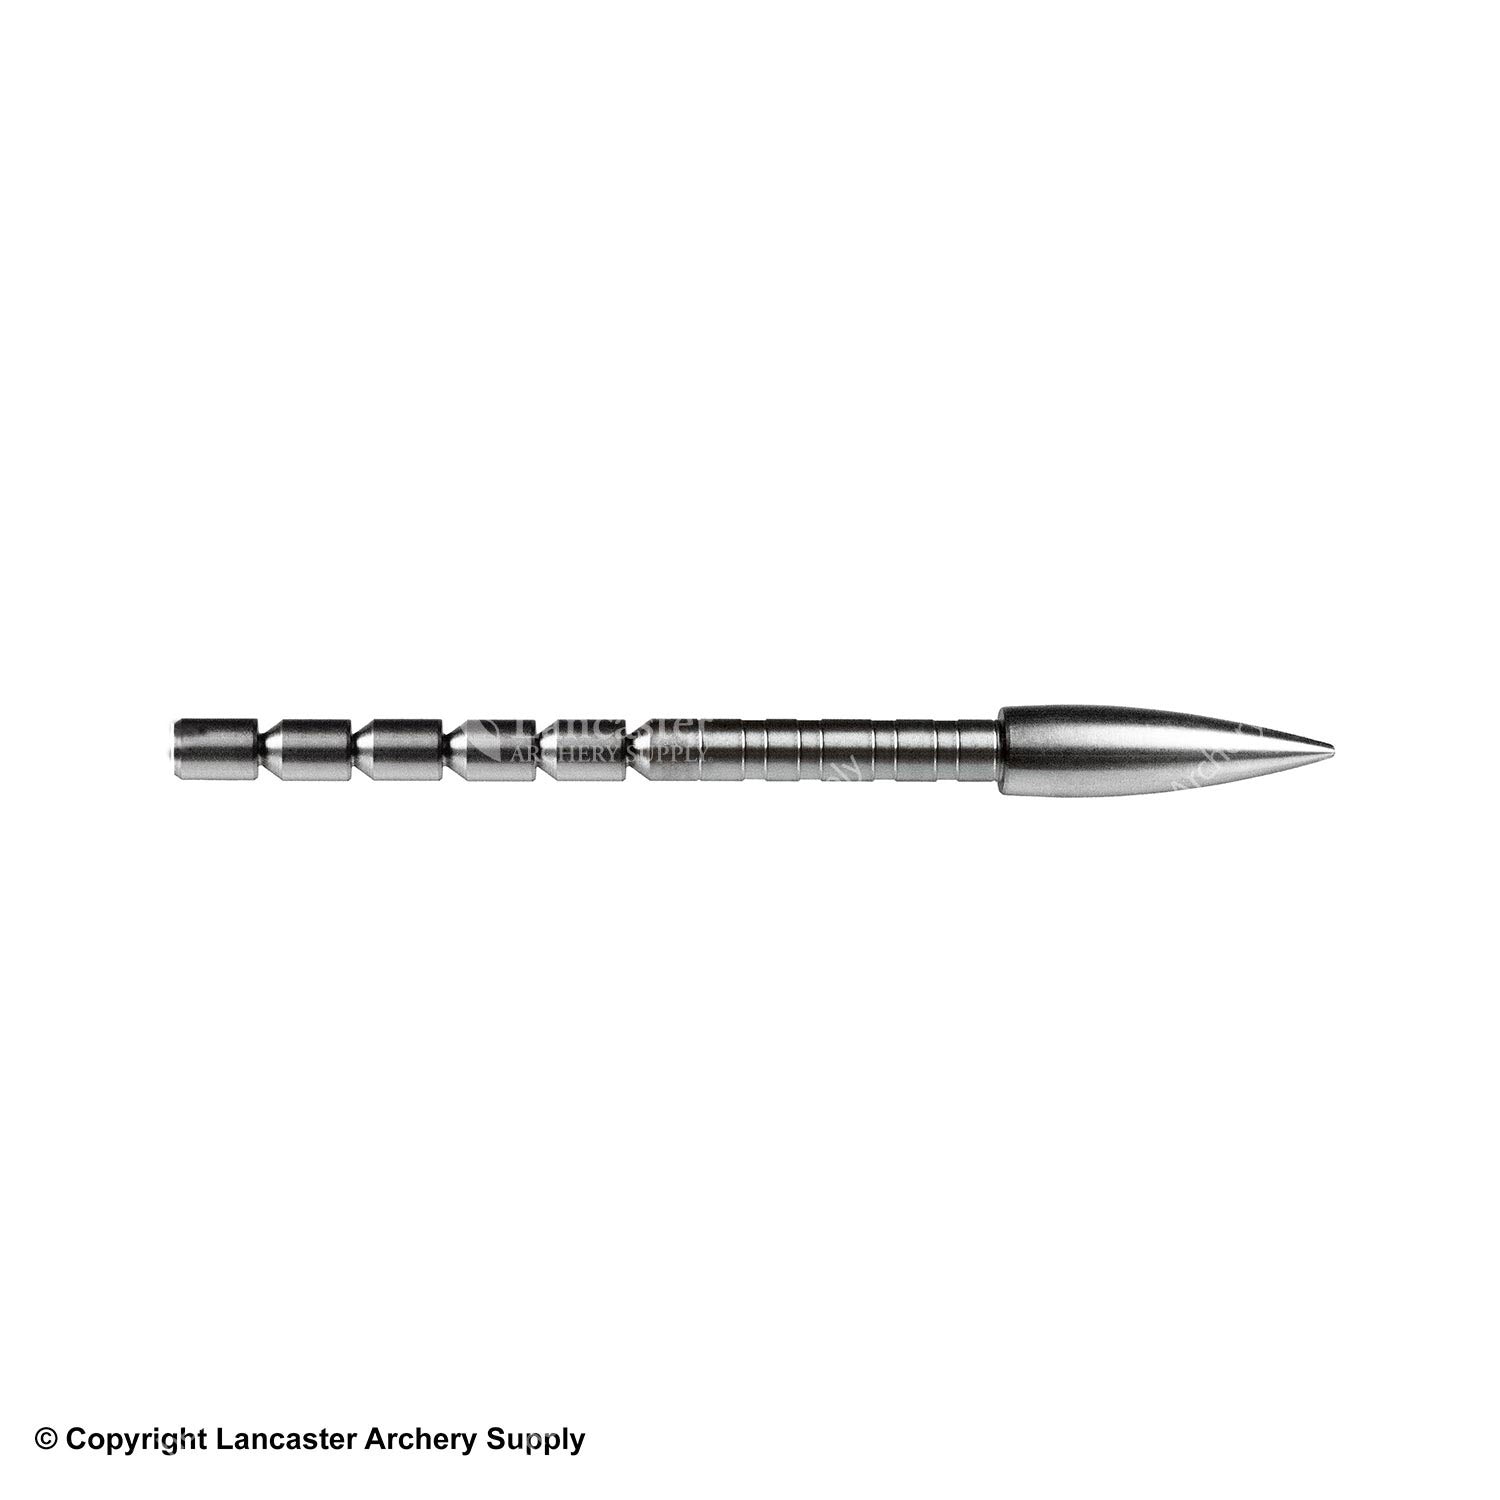 TopHat SL Convex DWAC Stainless Steel Point (.166